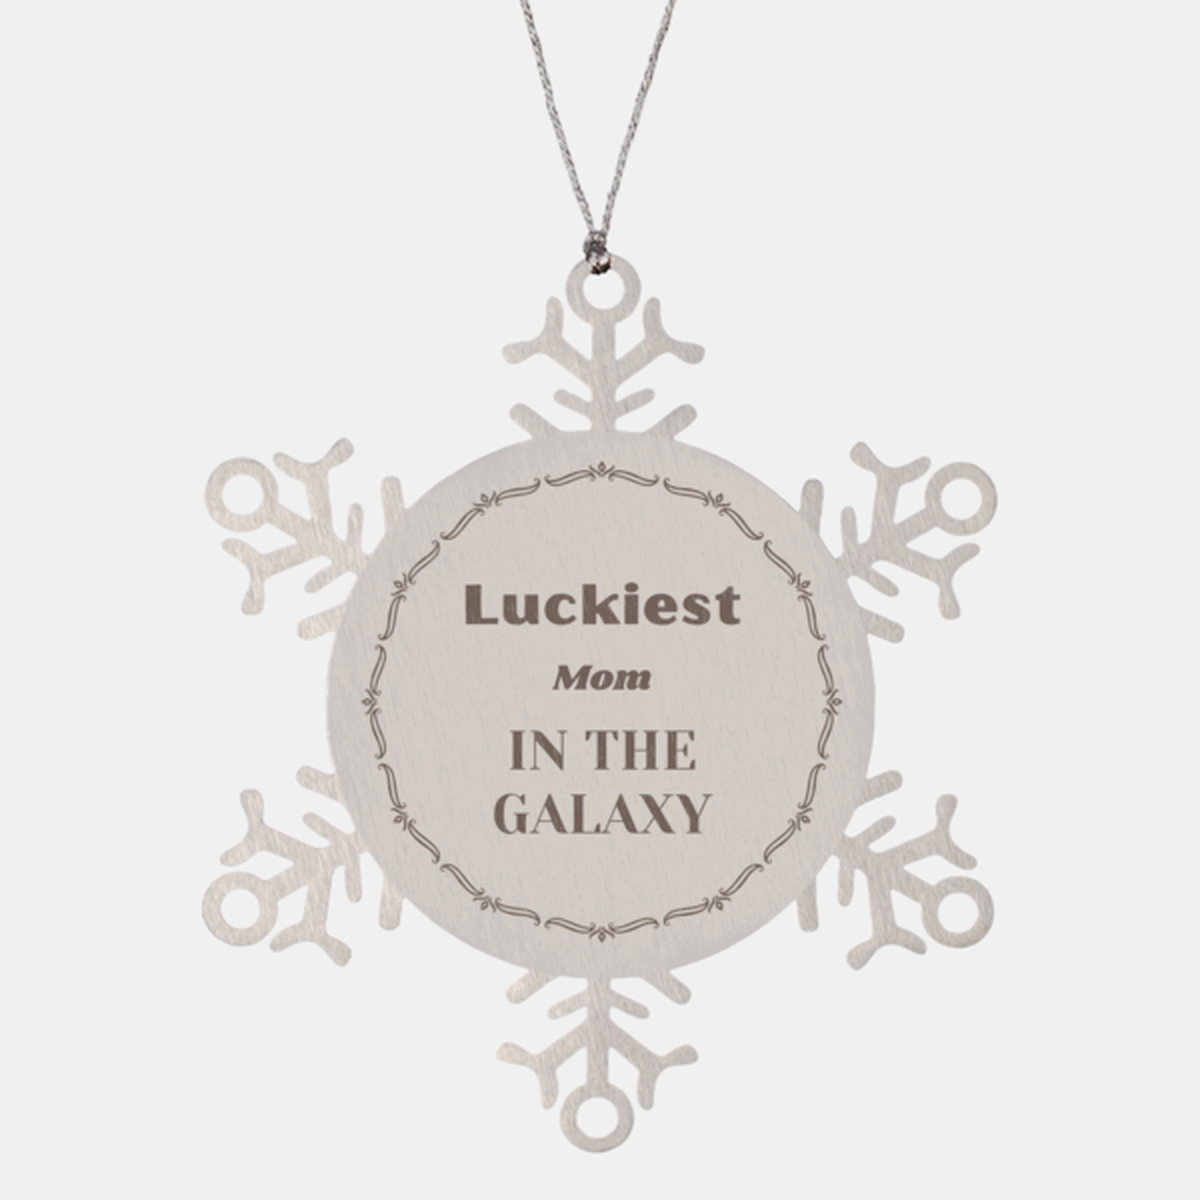 Luckiest Mom in the Galaxy, To My Mom Ornament Gifts, Christmas Mom Snowflake Ornament Gifts, X-mas Decorations Unique Gifts For Mom Men Women